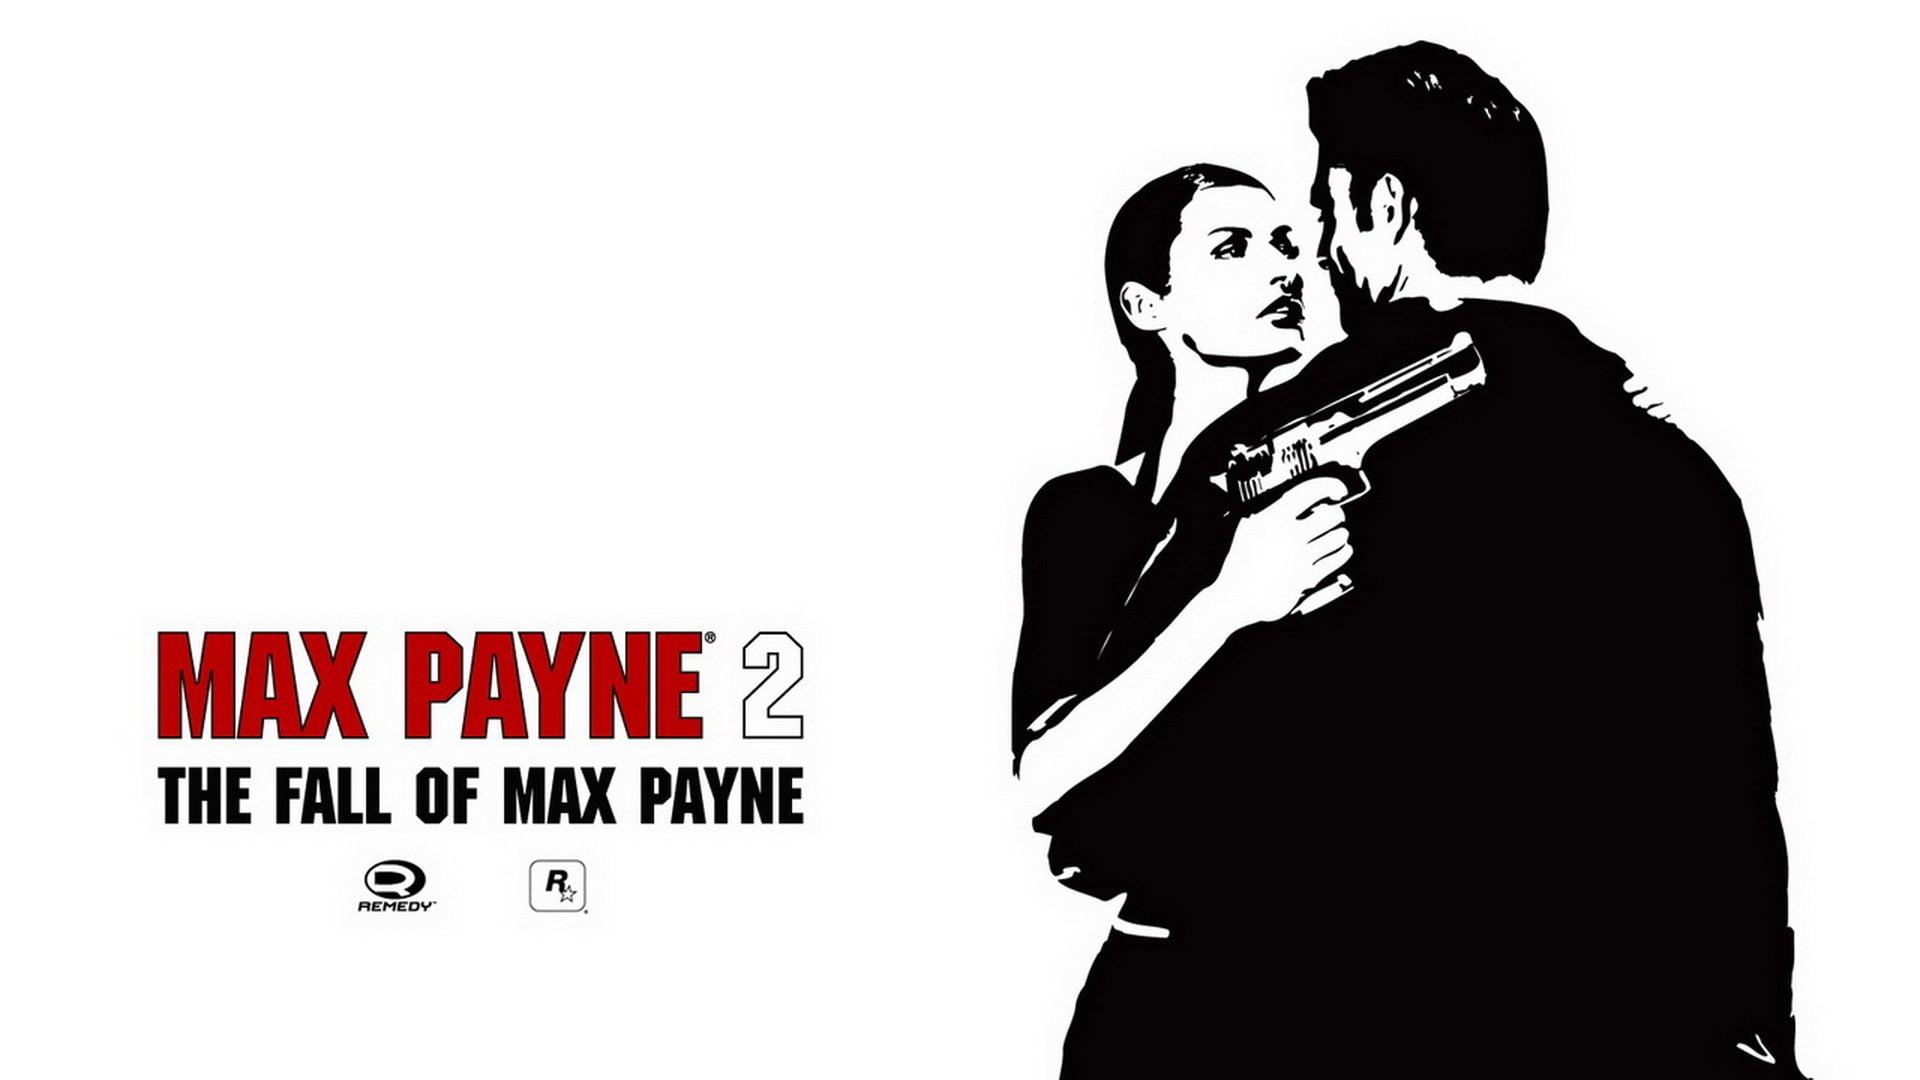 Video Game, Max Payne 2: The Fall of Max Payne